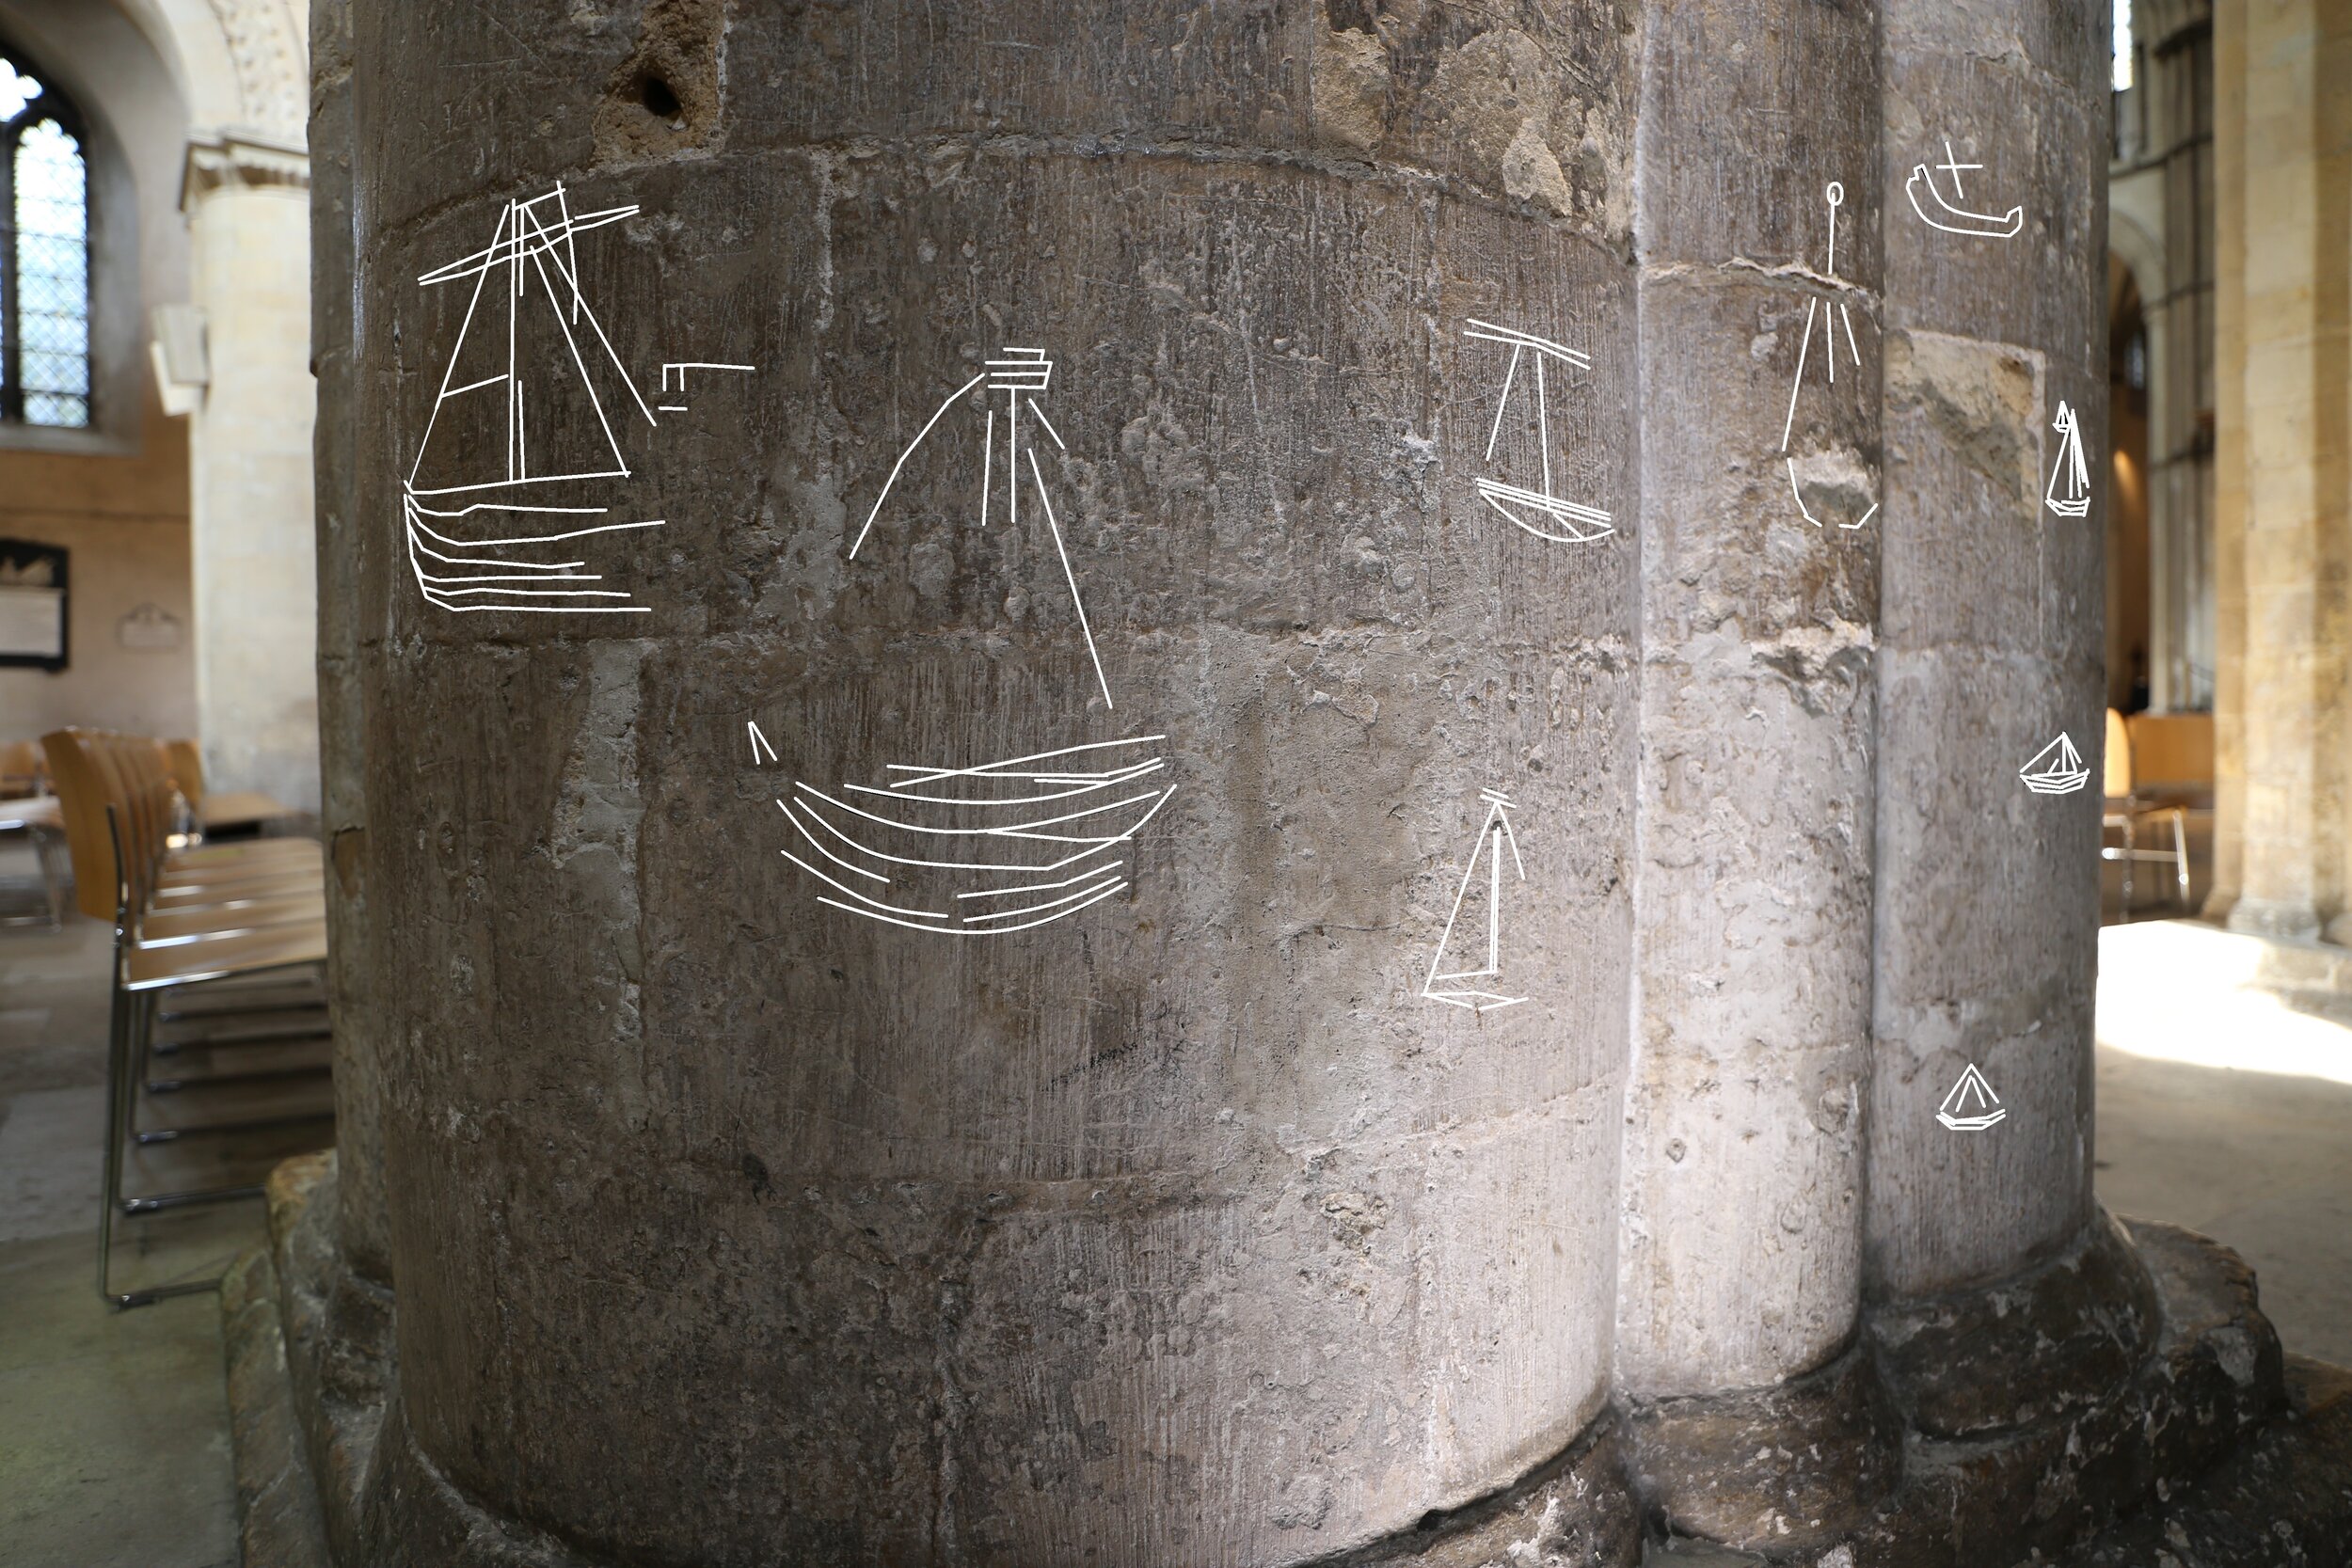 Digital trace of cluster of ship graffiti on a pier in the south nave arcade.